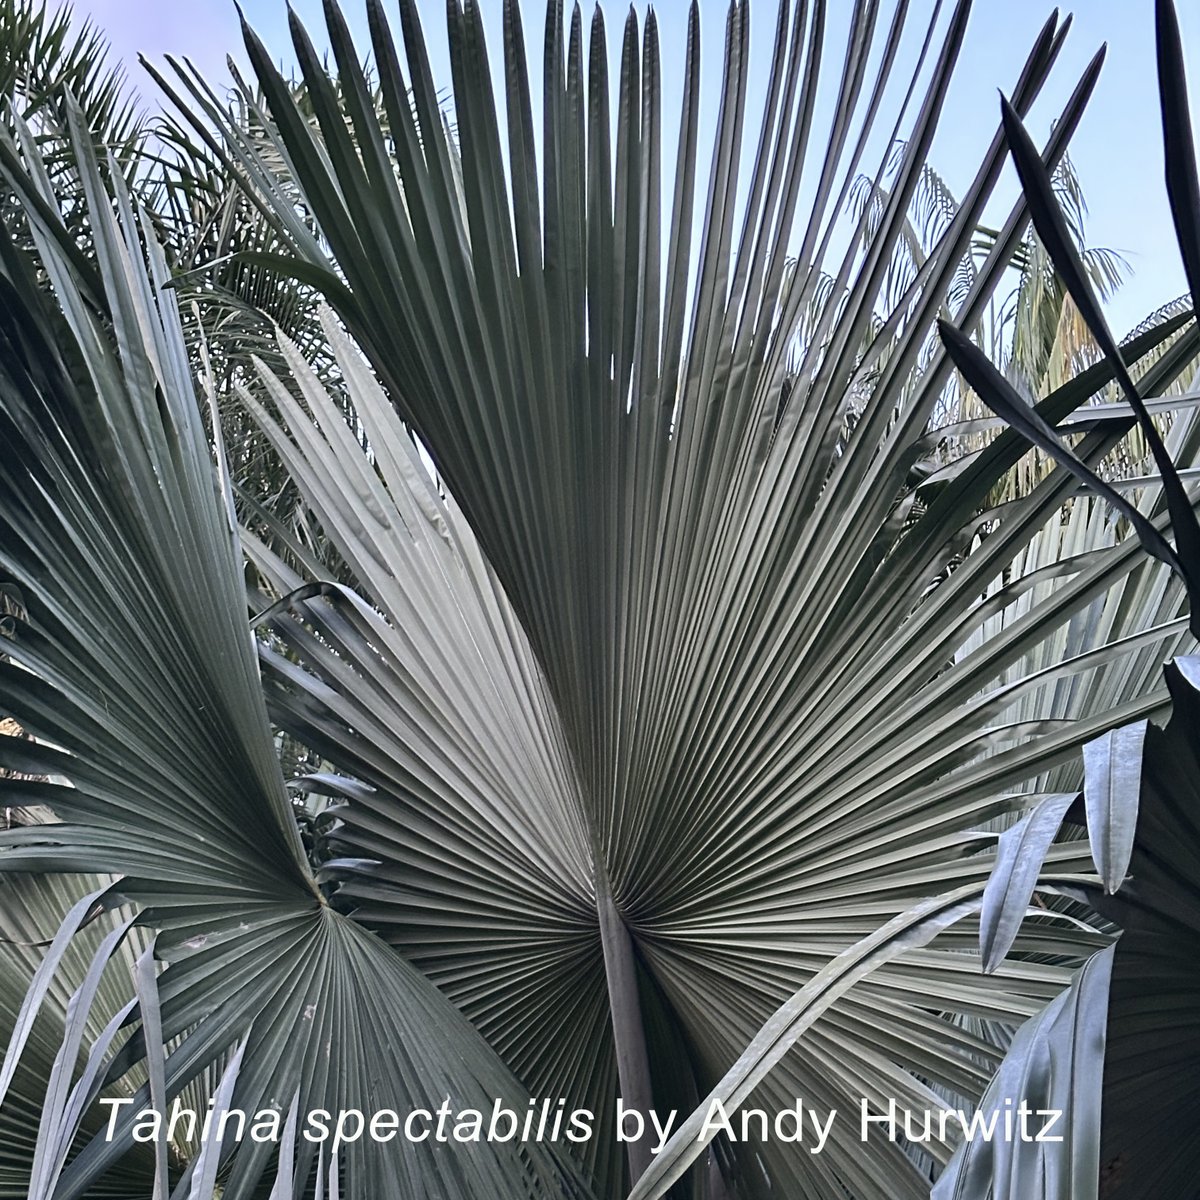 Did you know one of the most amazing and endangered palms in the world was discovered through a posting on our PalmTalk forum? Posted photos of Tahina spectabilis led botanists to this amazing palm, & we helped conserve it through our Save the Species campaign. #PalmDay